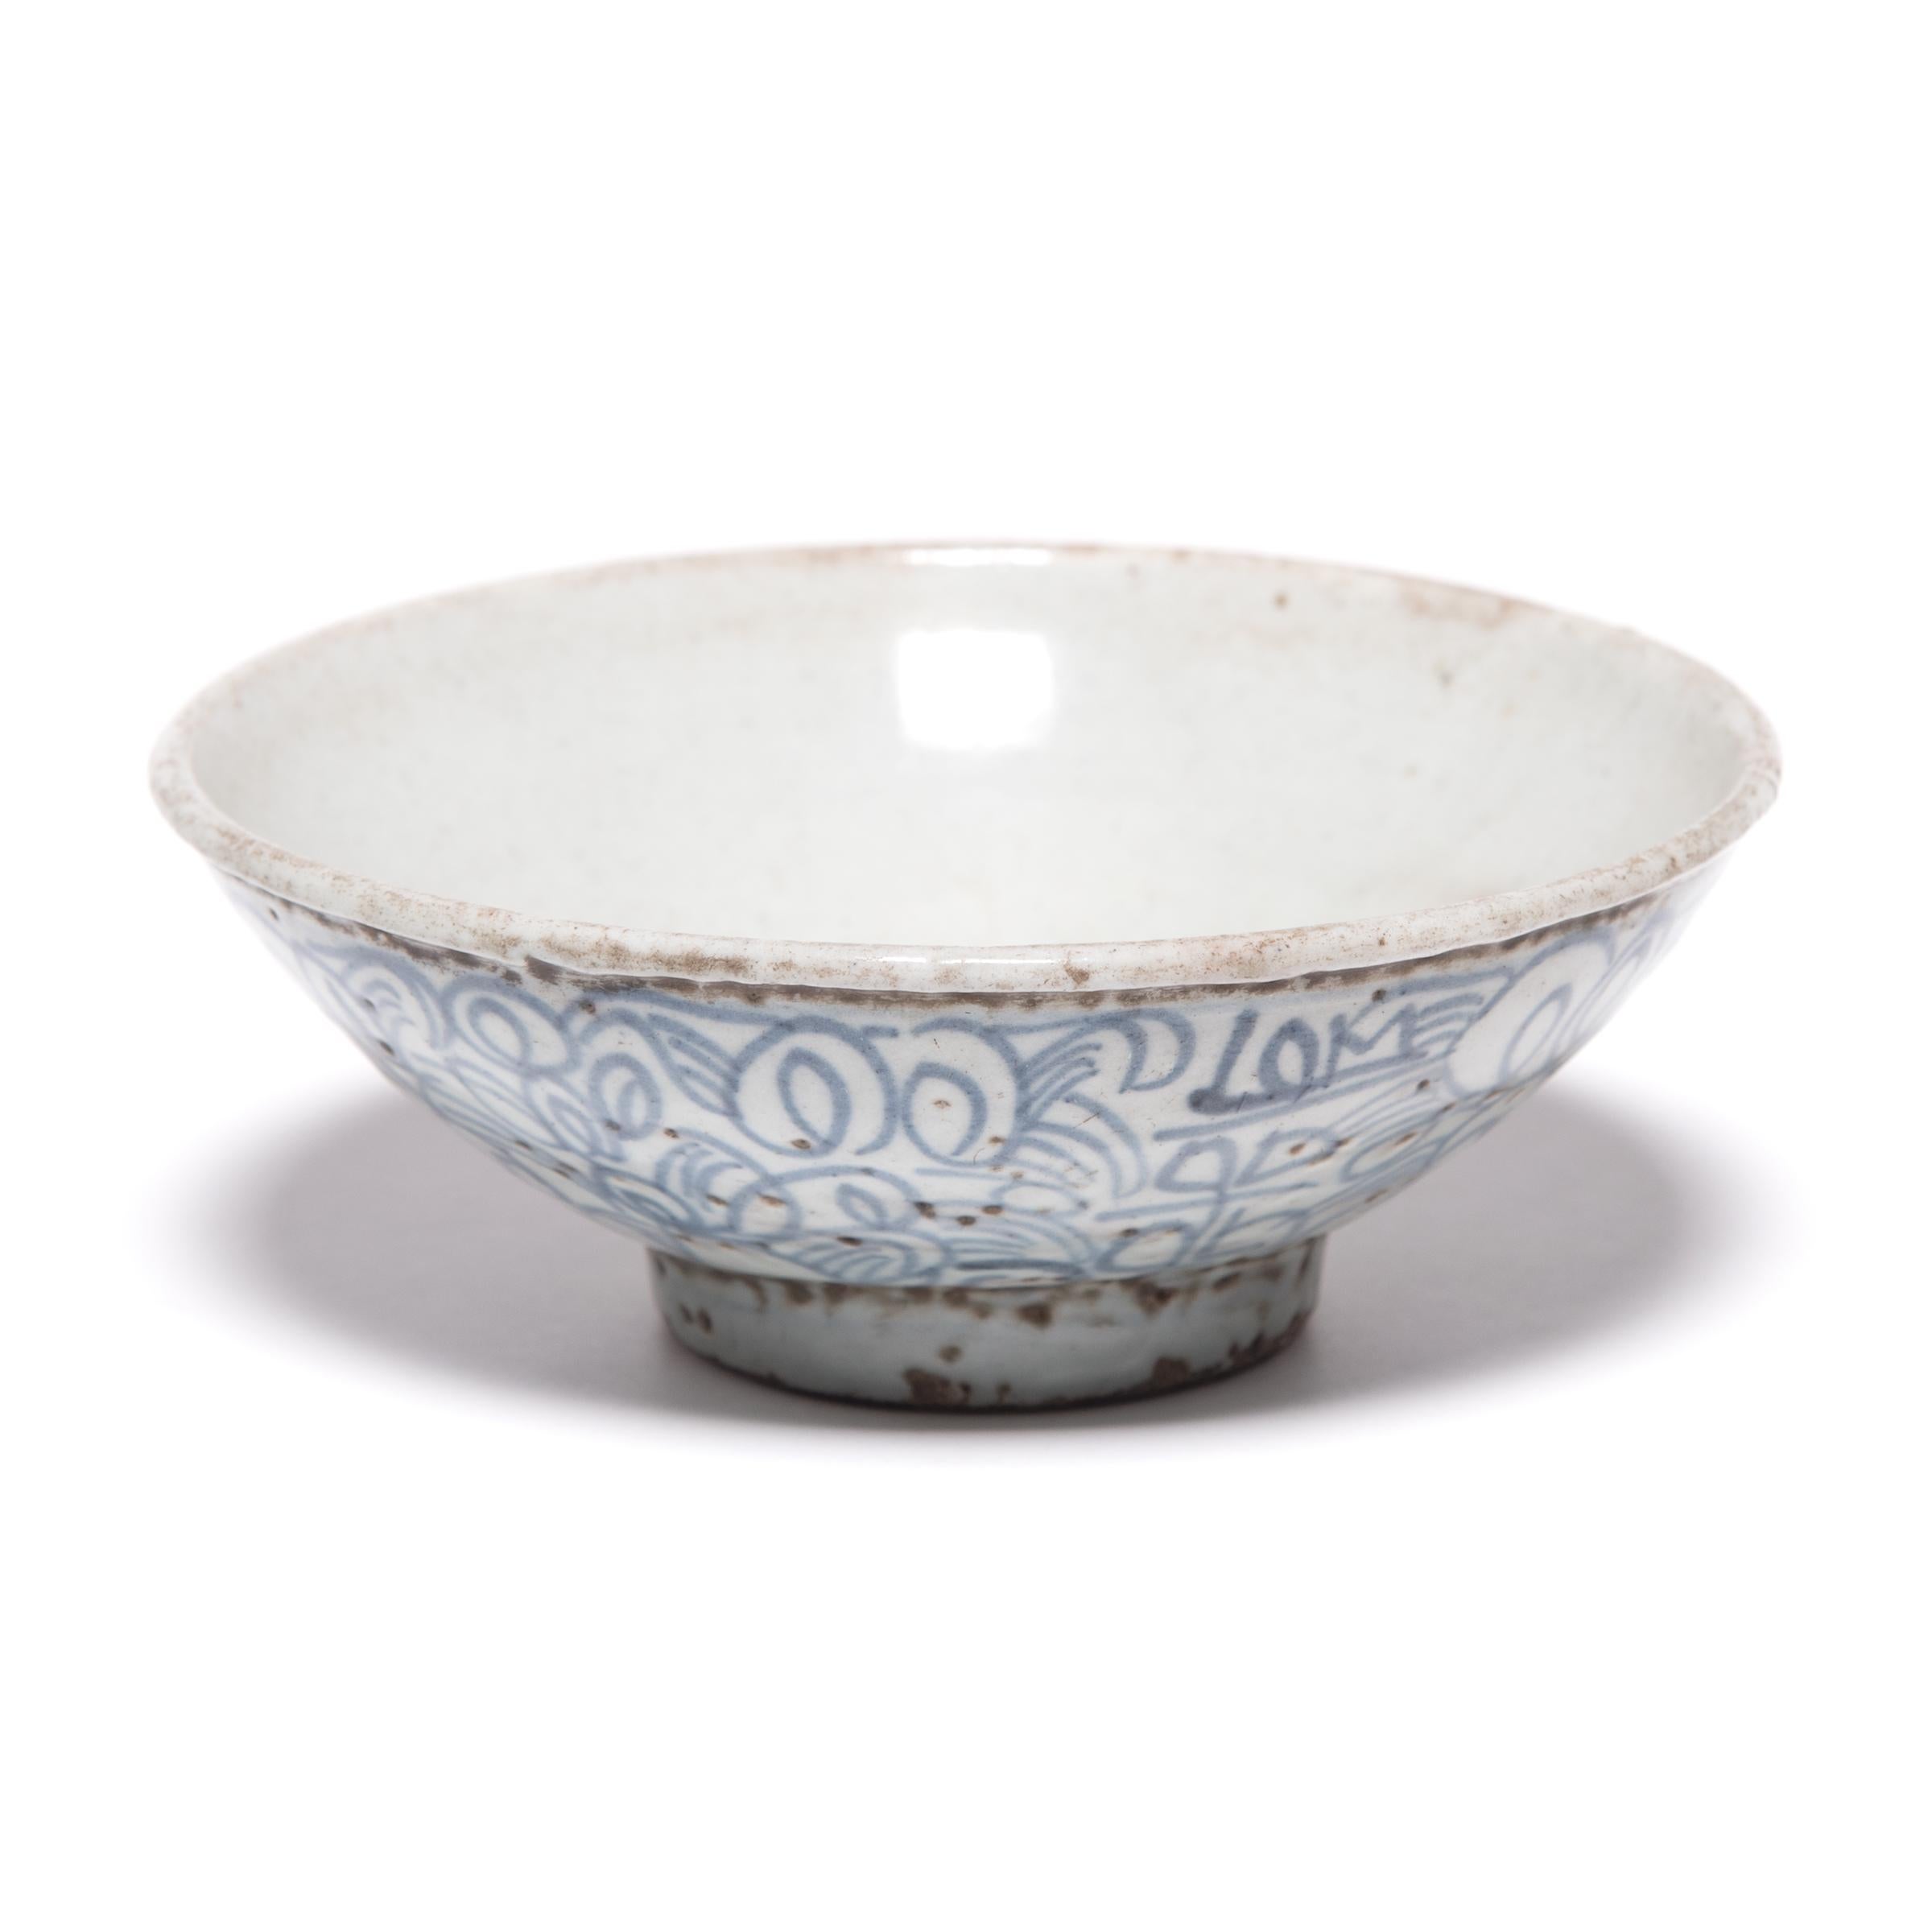 This late 19th century footed bowl would have been offered by Chinese traders traveling along the Silk Road in exchange for spices or gems. The Chinese artisans who hand-painted it with scrolls, loops, and crossed lines thought the meandering